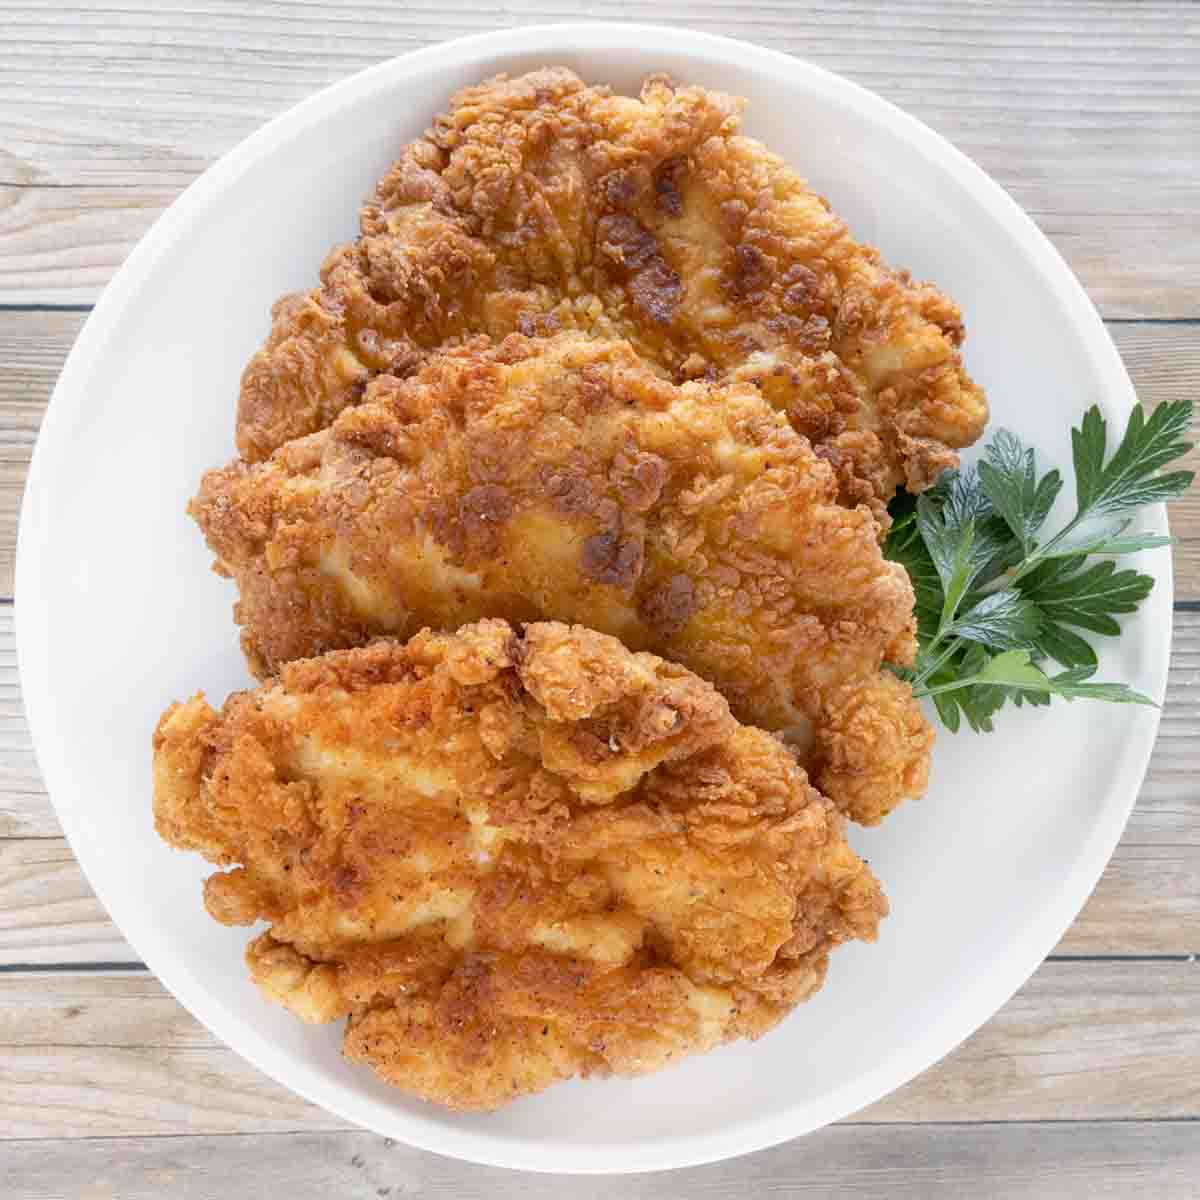 Three pieces of Chicken fried chicken on a white plate.